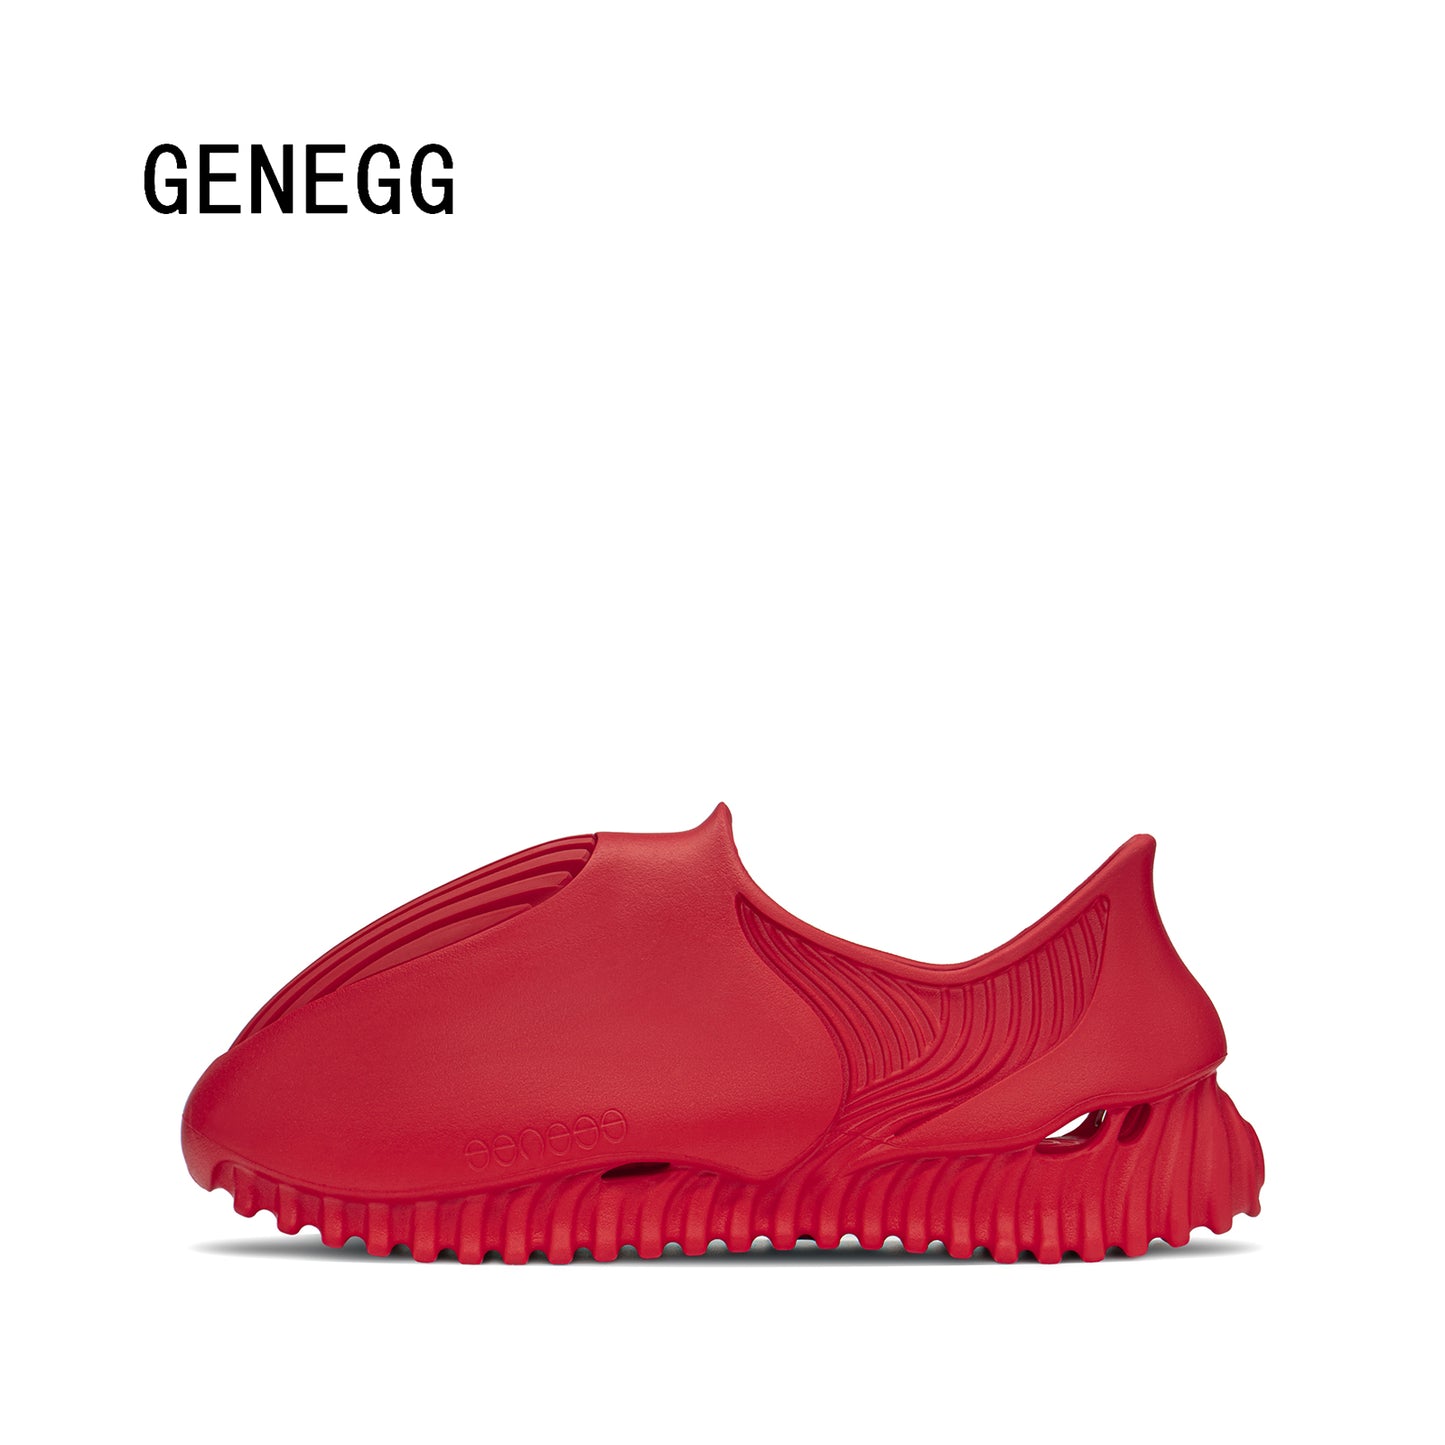 GENEGG Whale Ruby Red